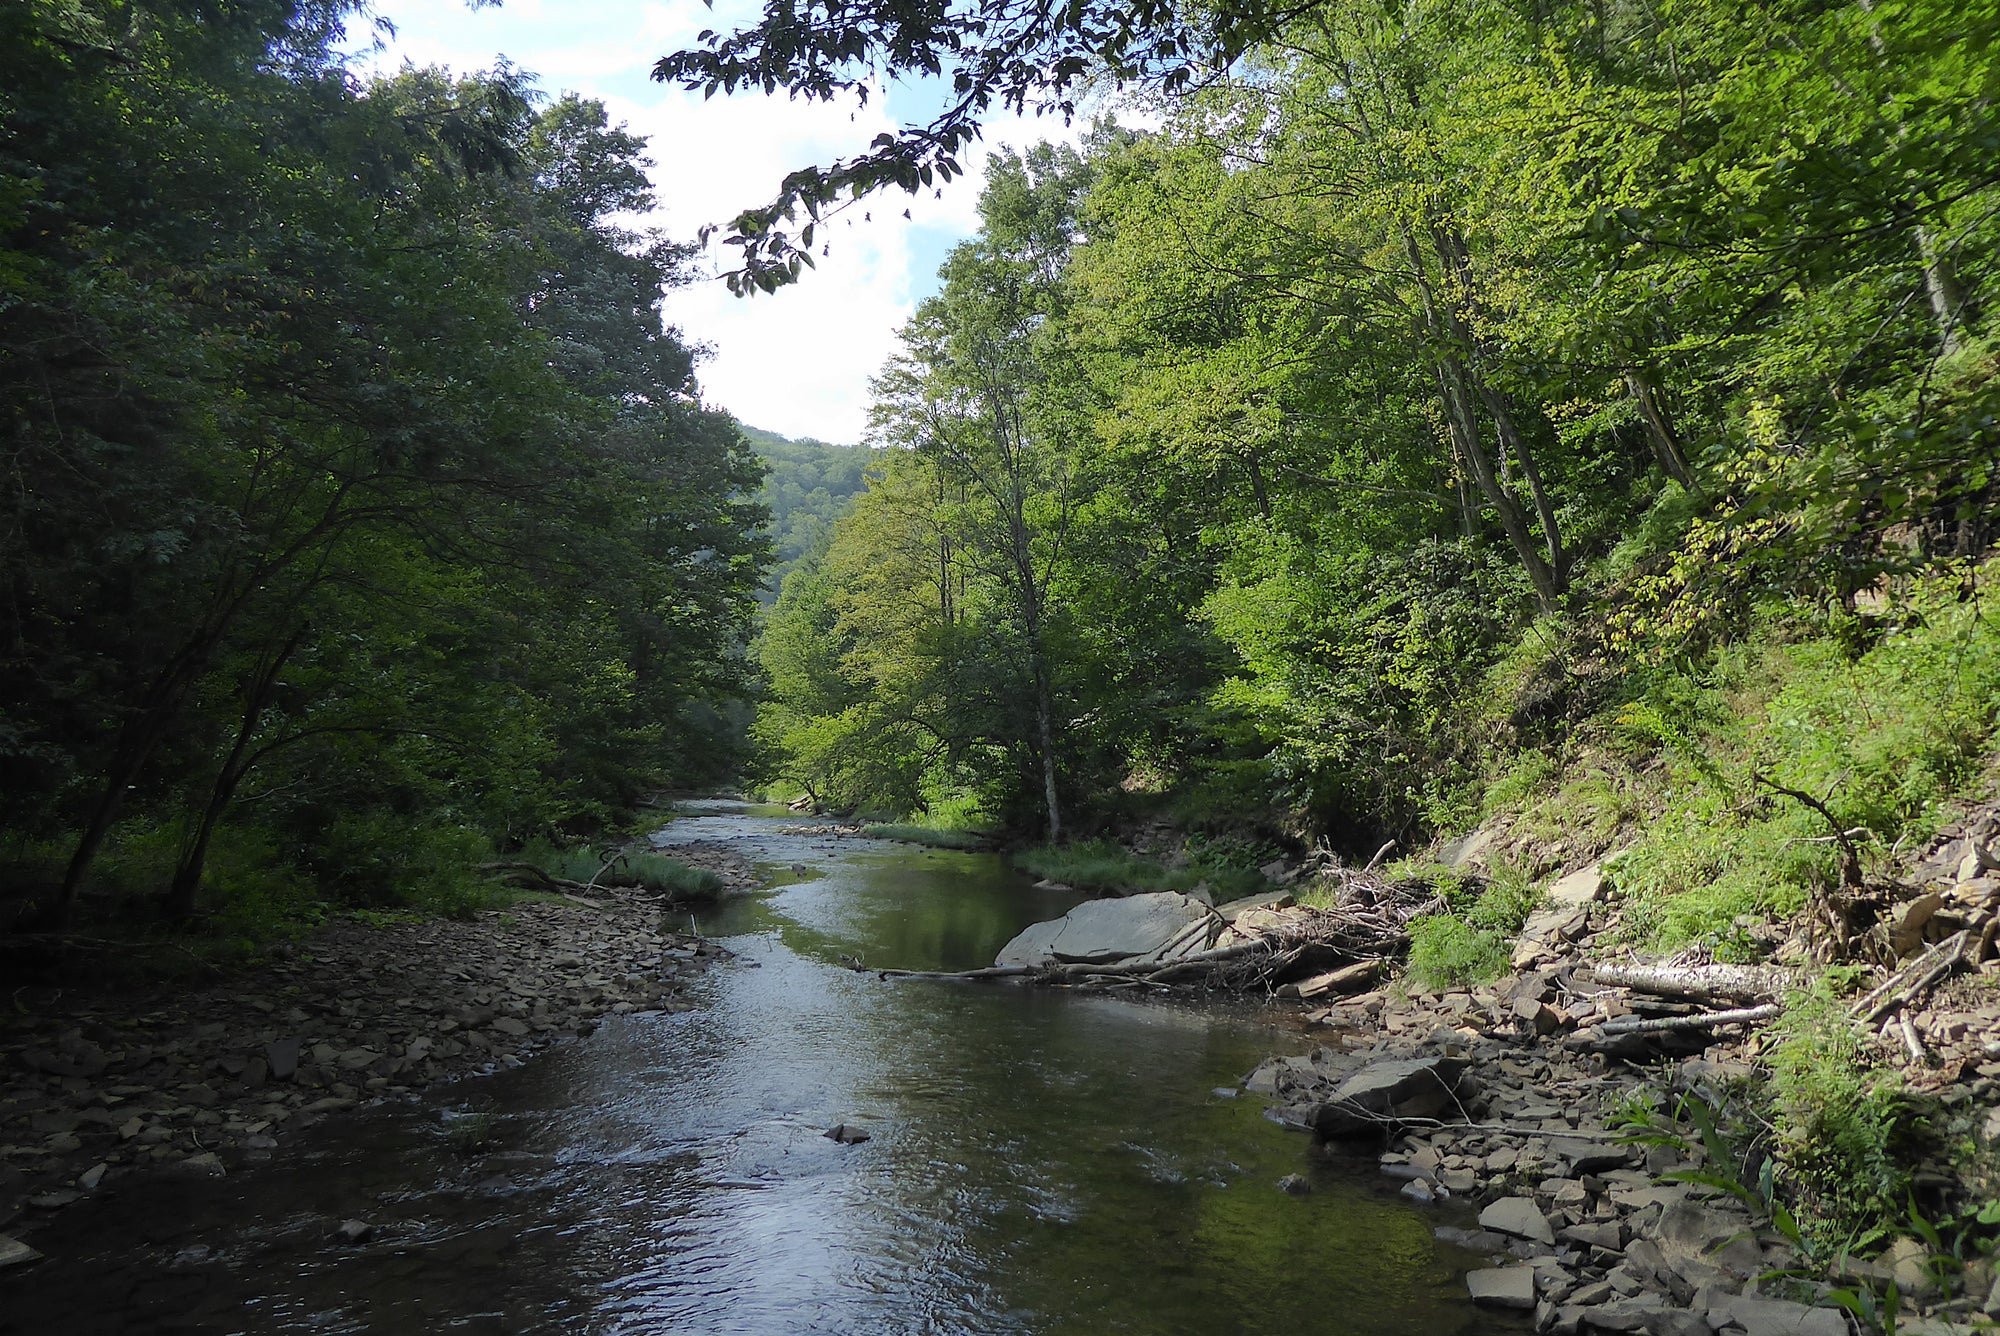 Laurel River Trail #306: Traversing Two Wilderness Areas In Monongahela National Forest, WV